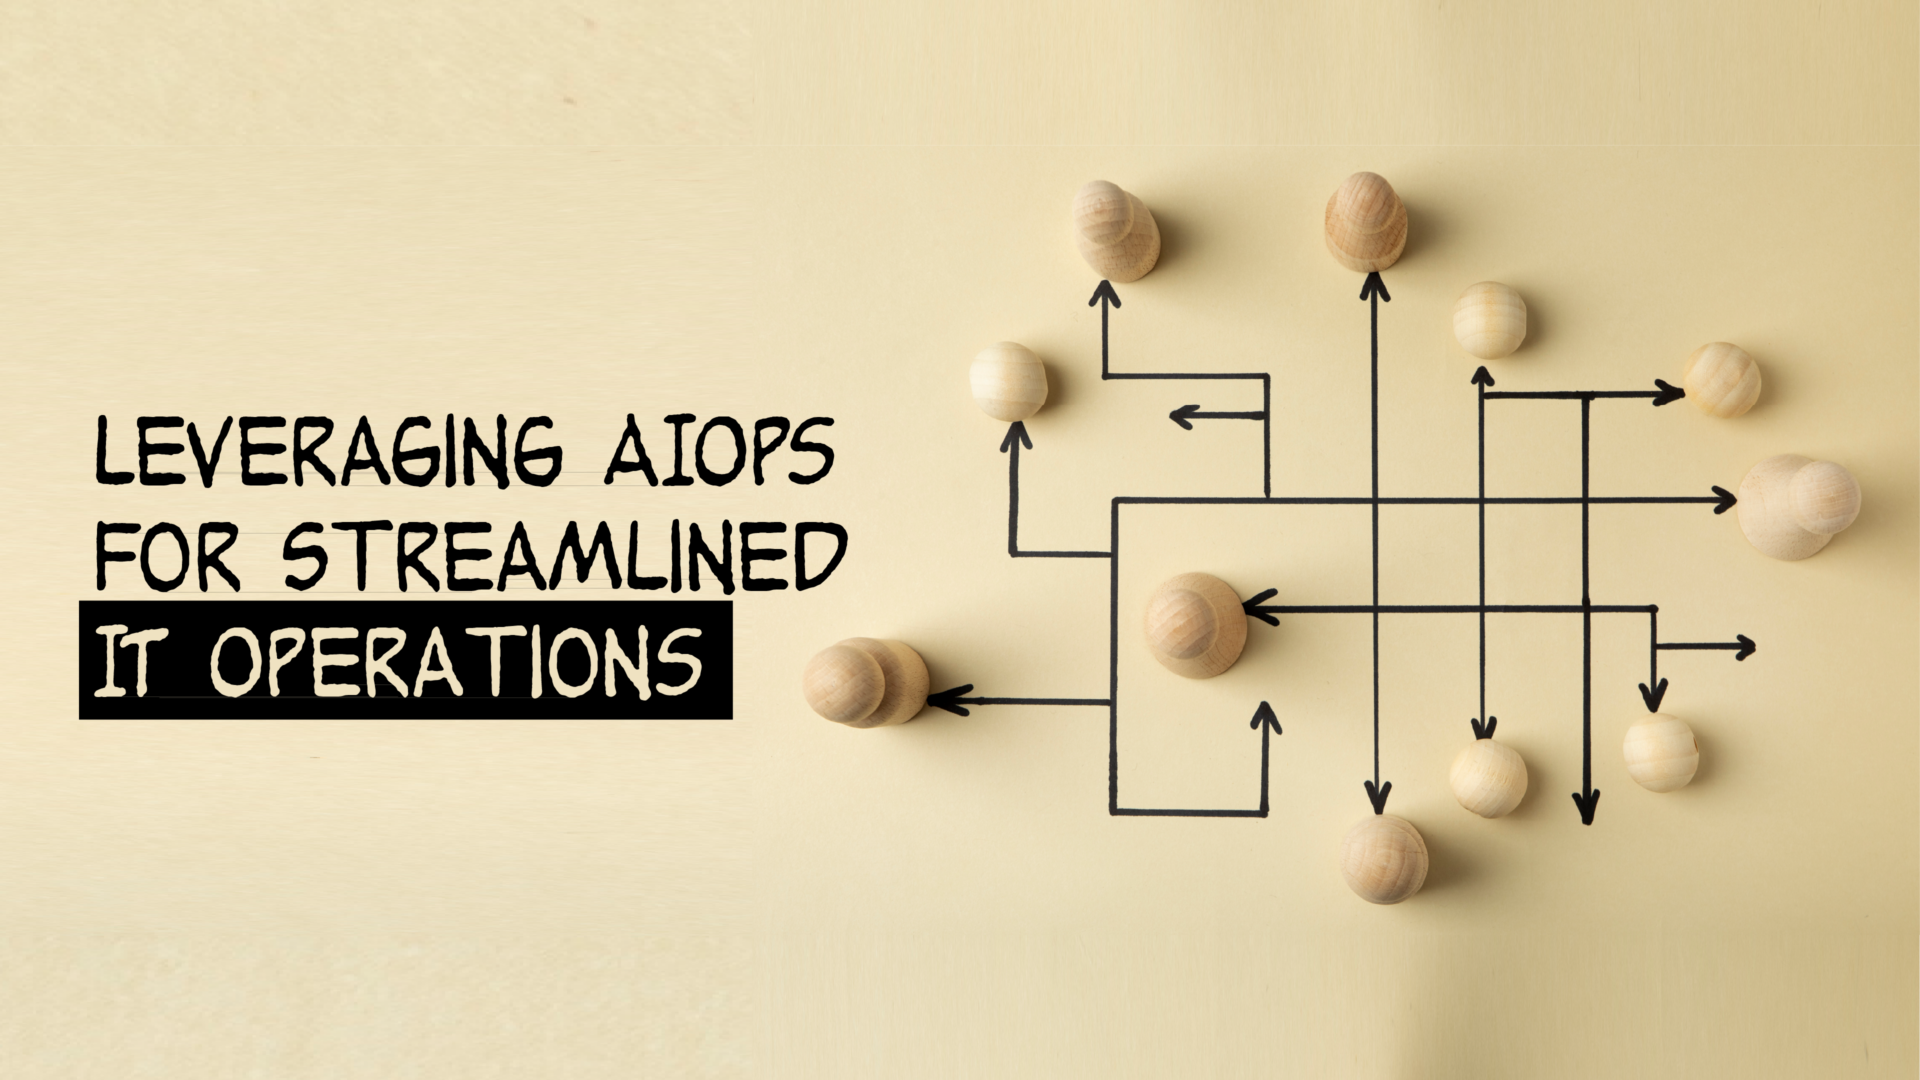 Leveraging AIOps for Streamlined IT Operations